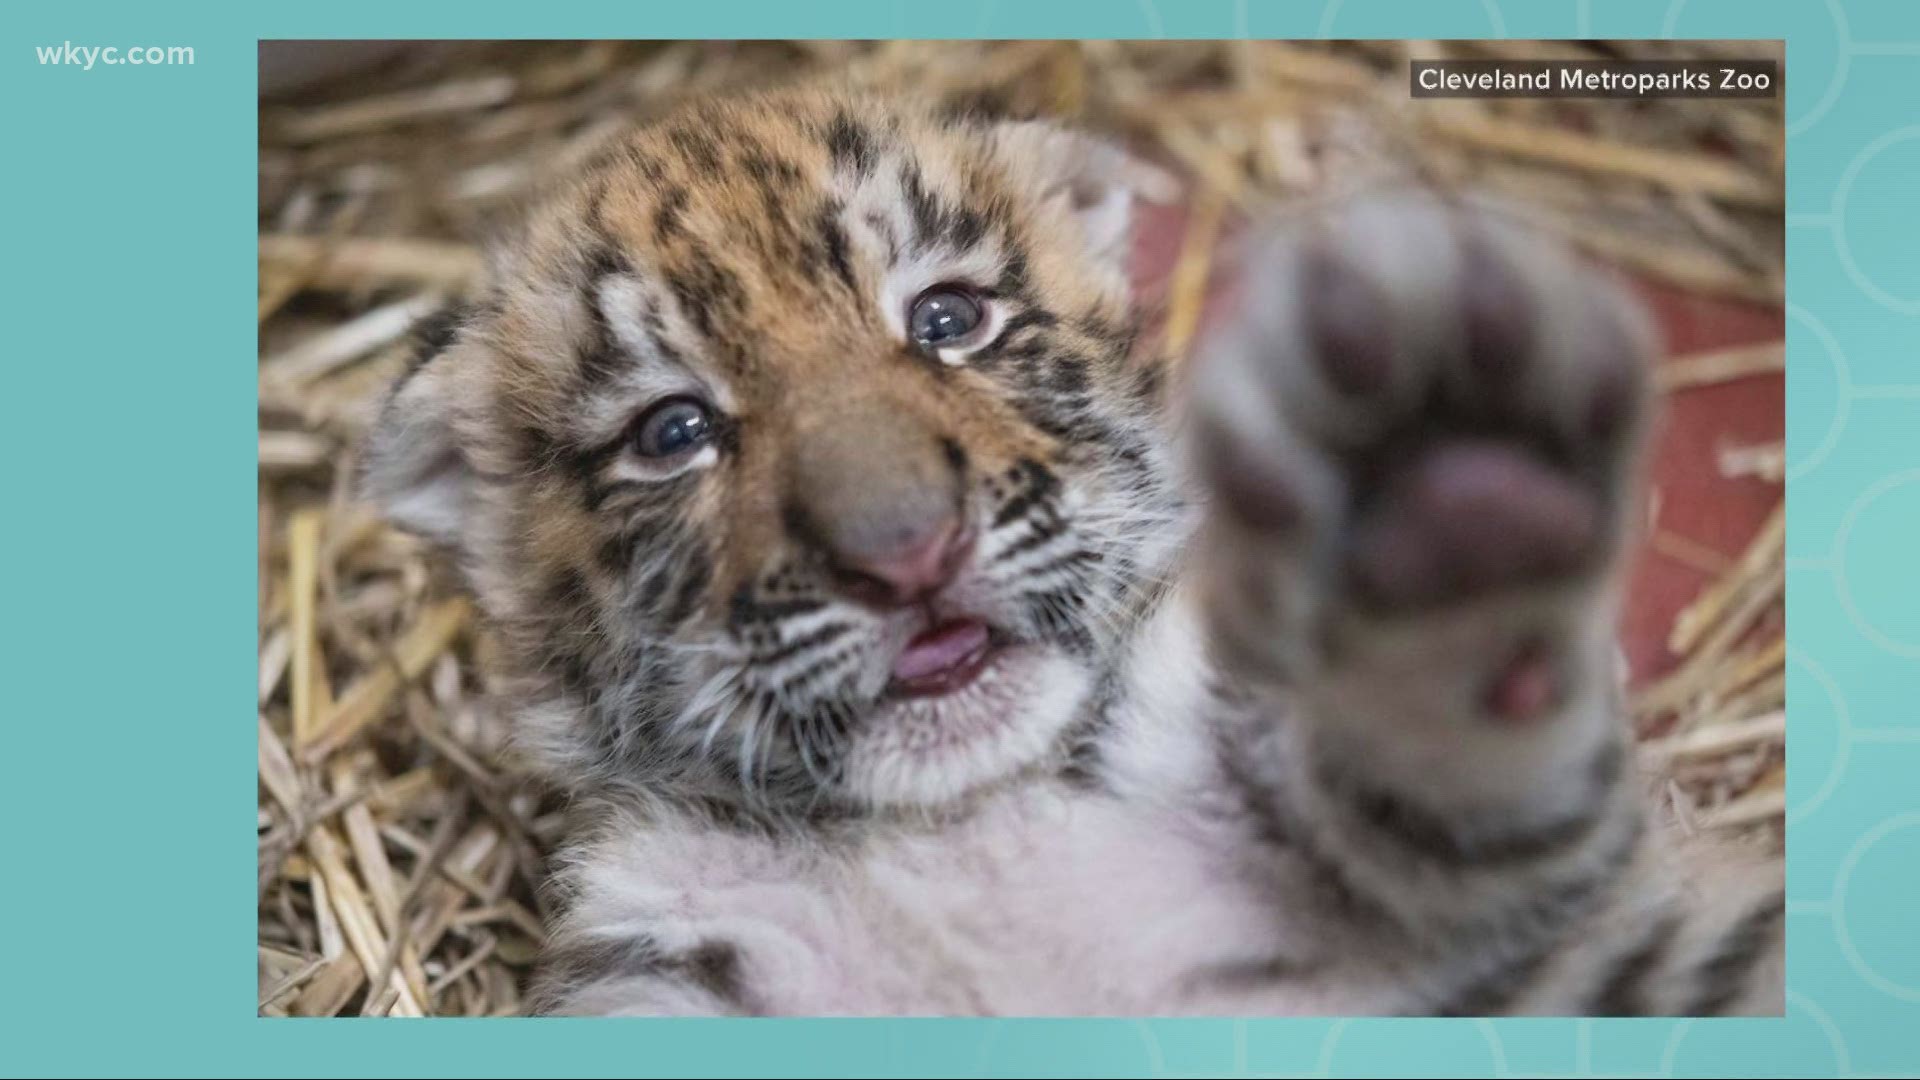 Jan. 29, 2021: The Cleveland Metroparks Zoo has announced the birth of two Amur tiger cubs.